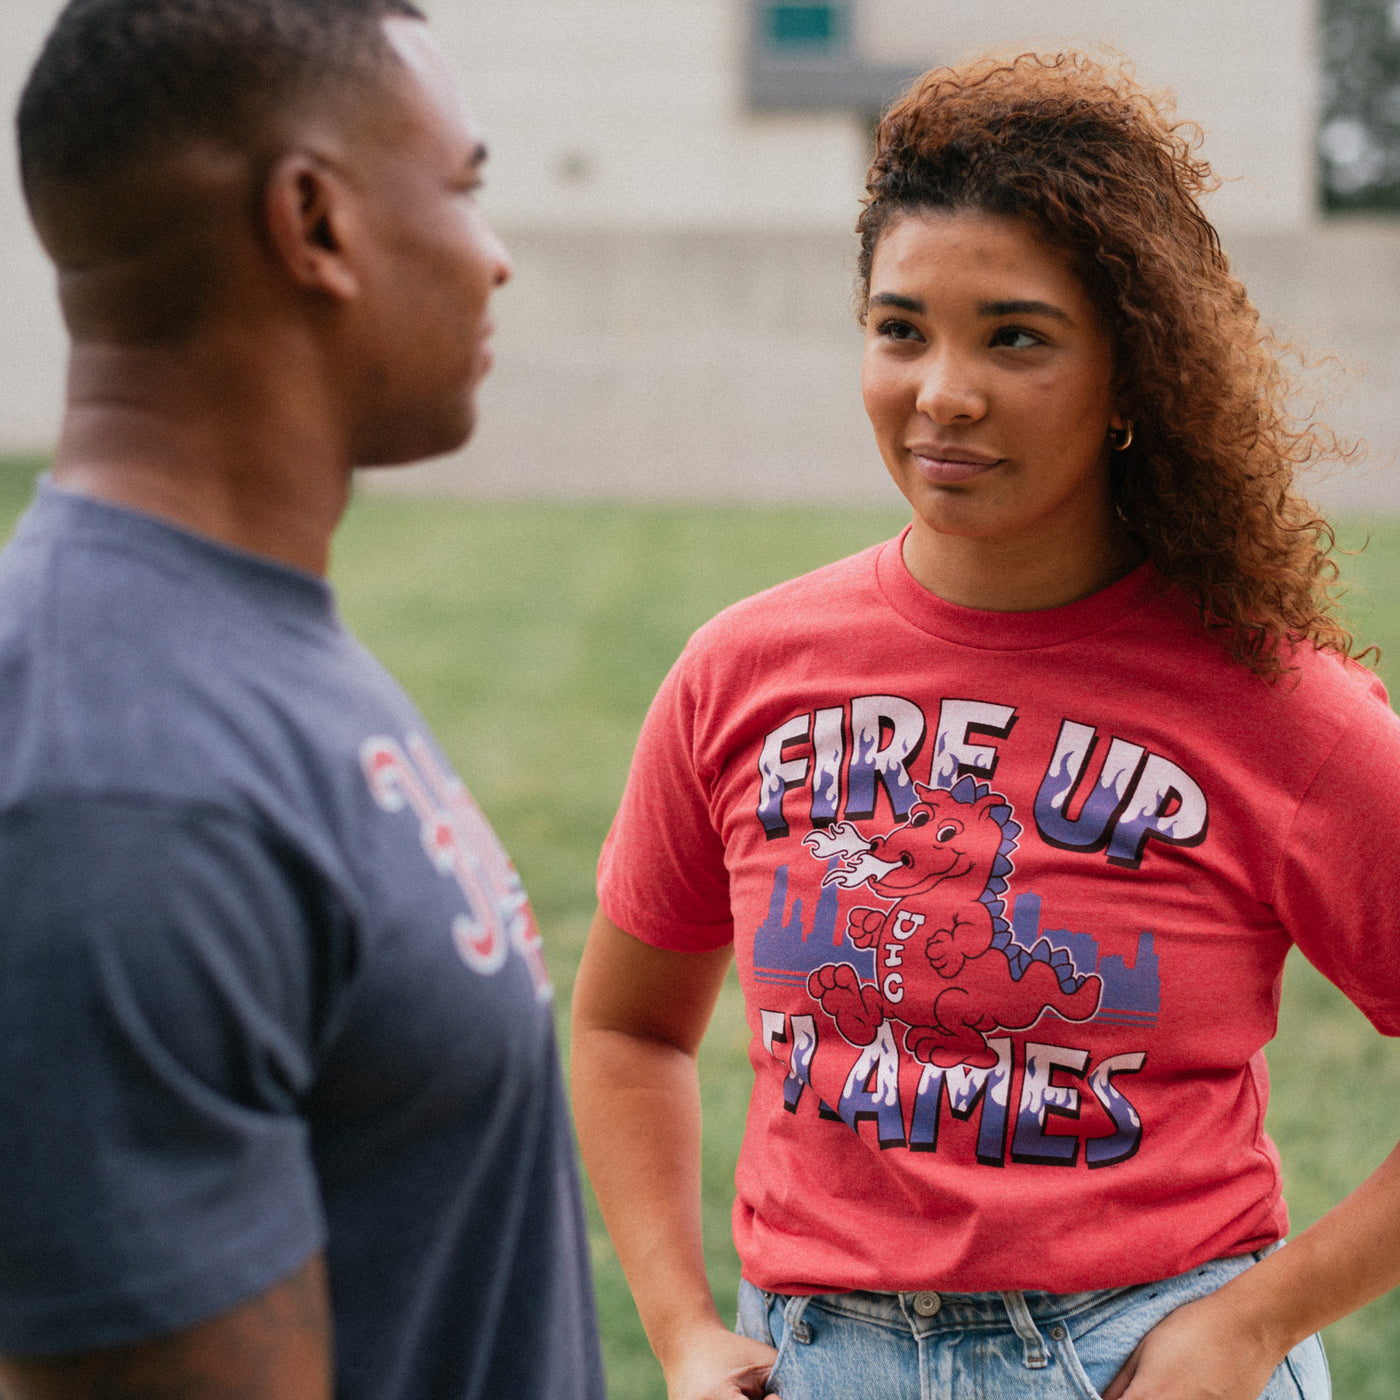 UIC Sparky D. Dragon "Fire Up Flames" Tee